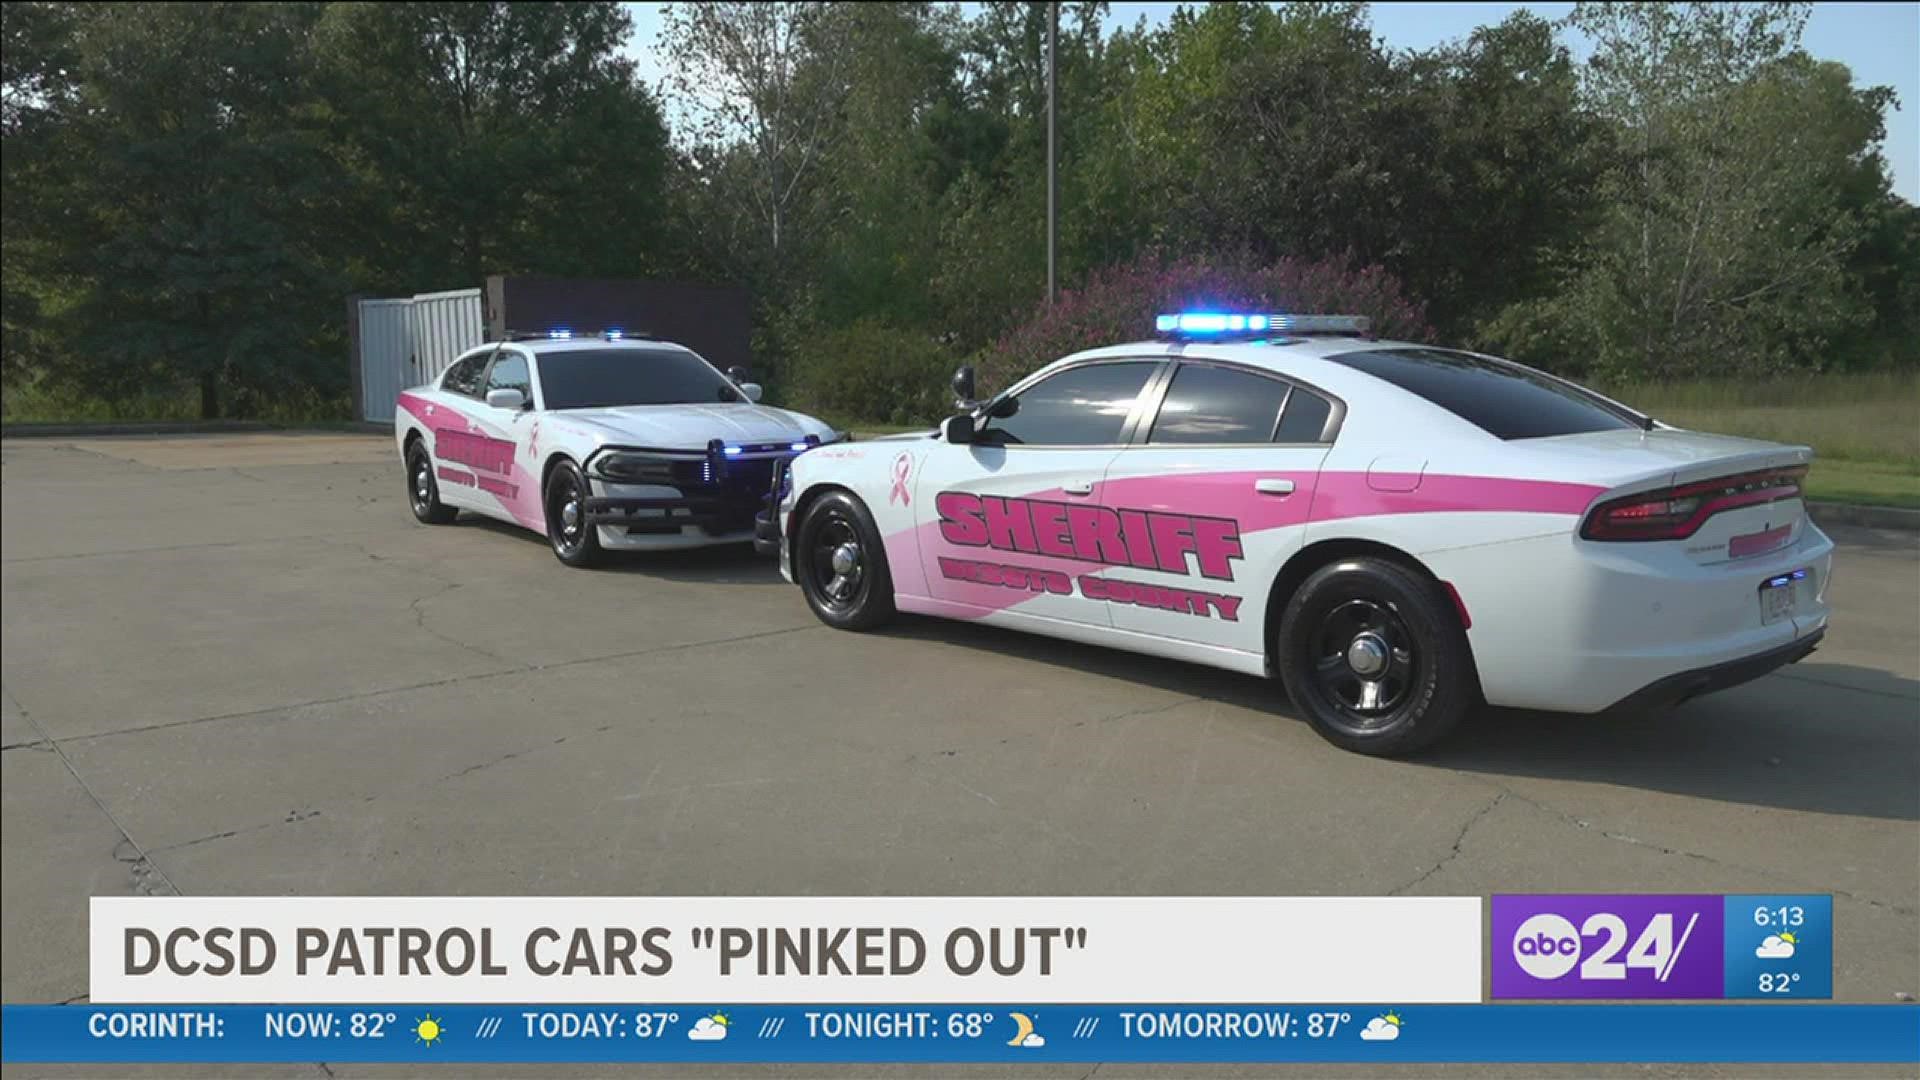 For Breast Cancer Awareness month, two patrol cars are painted pink for October.